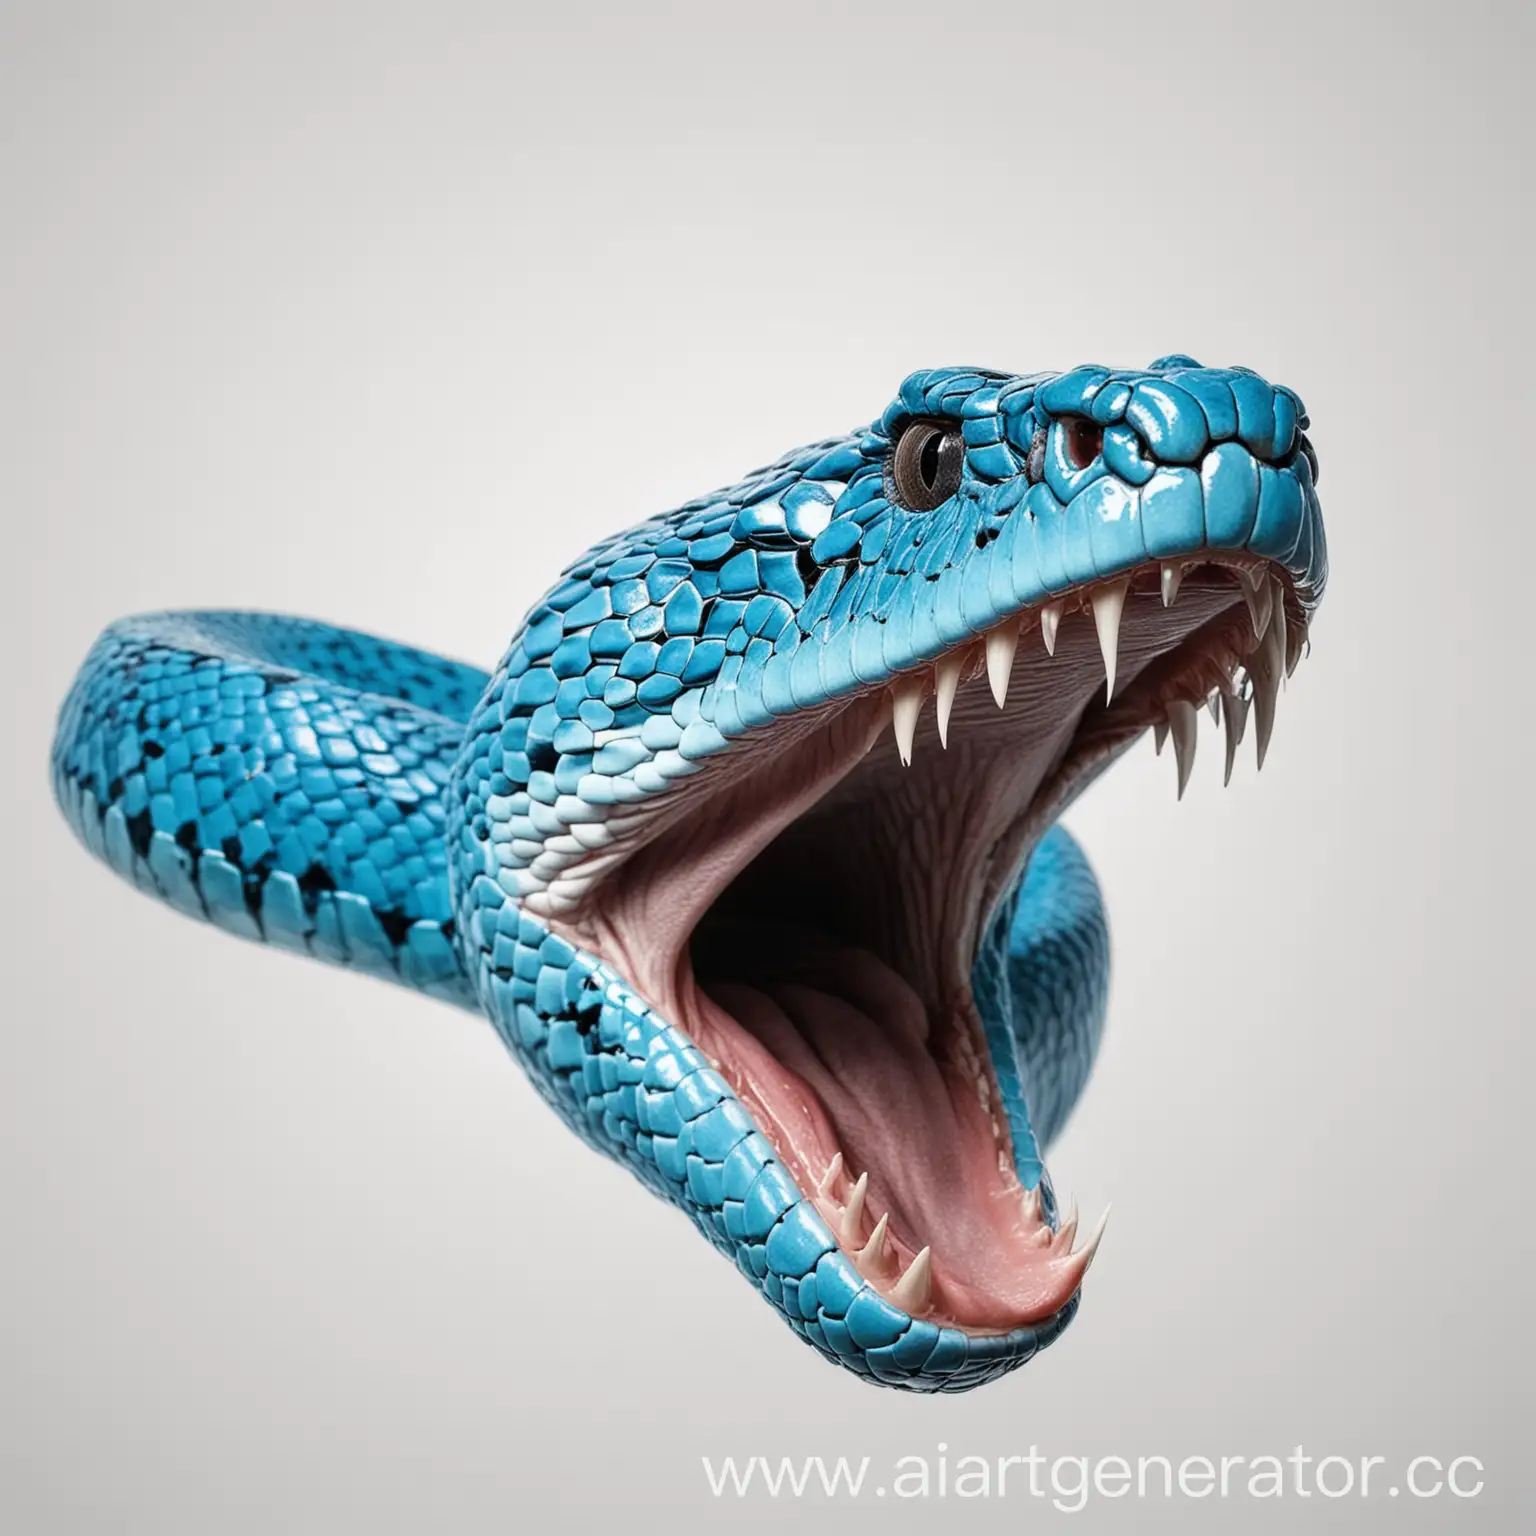 Vibrant-Neon-Blue-Snake-with-Open-Mouth-on-White-Background